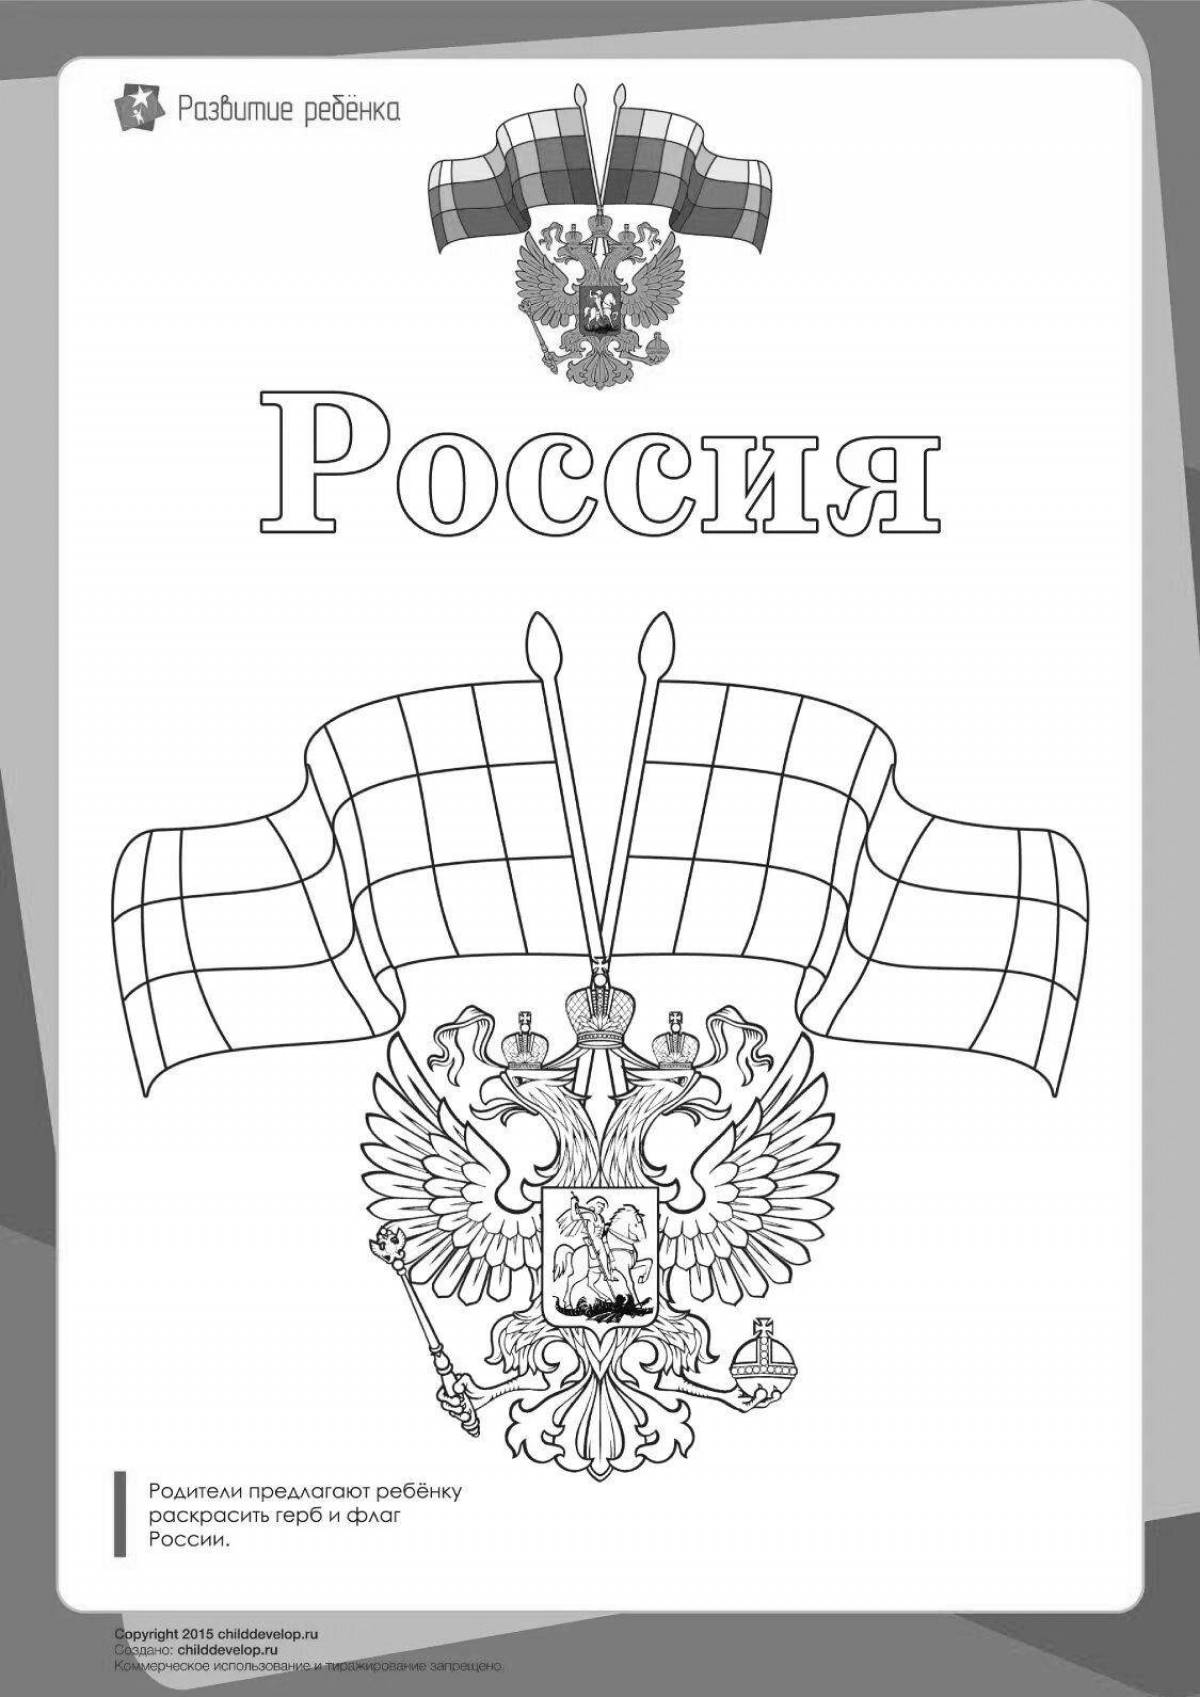 Royal flag of the Russian Federation